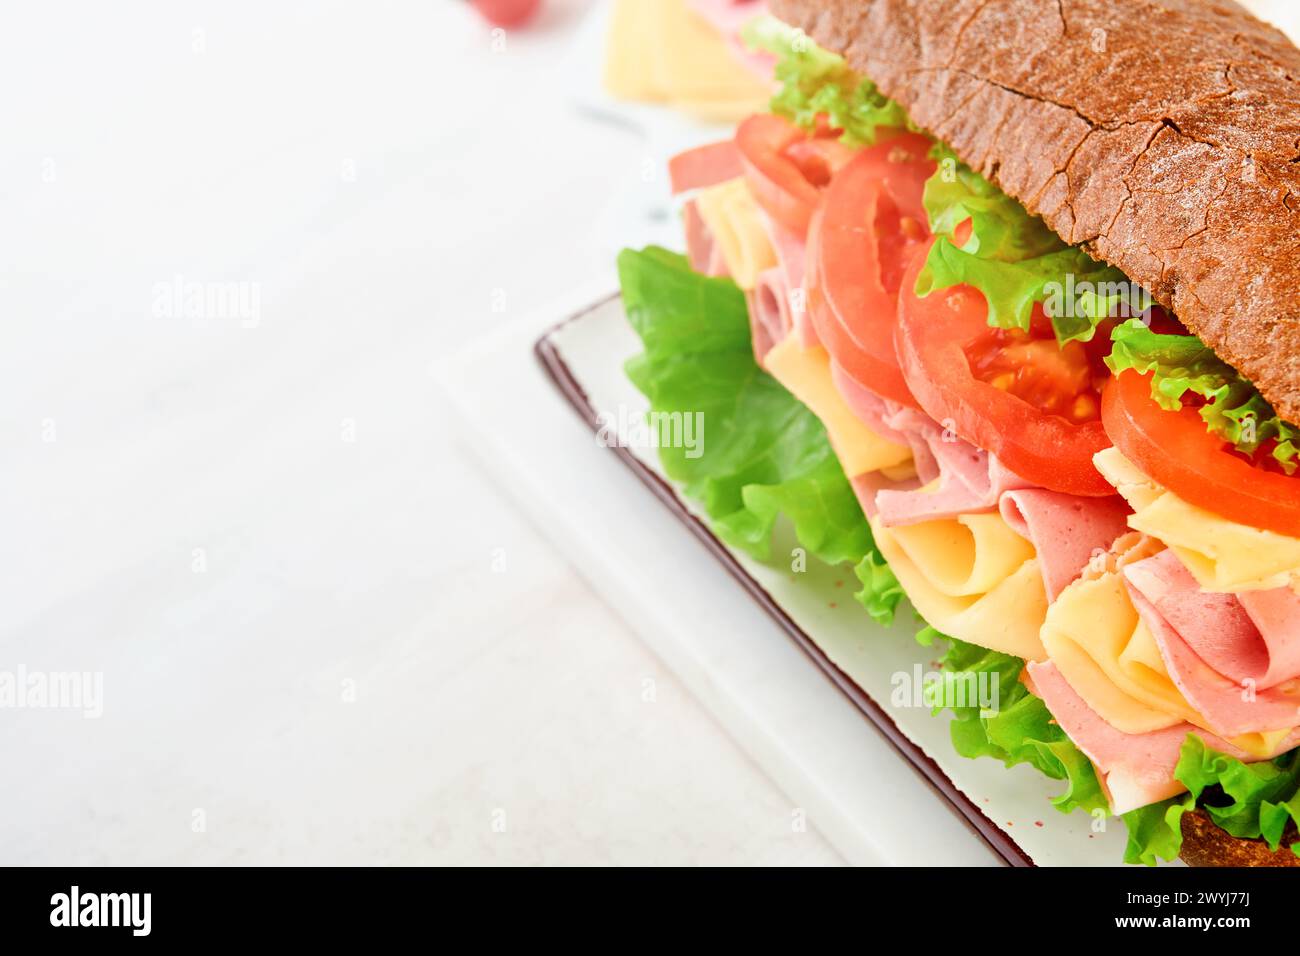 Sandwich. One fresh big submarine sandwich with ham, cheese, lettuce, tomatoes and microgreens on light background. Healthy breakfast theme concept, s Stock Photo